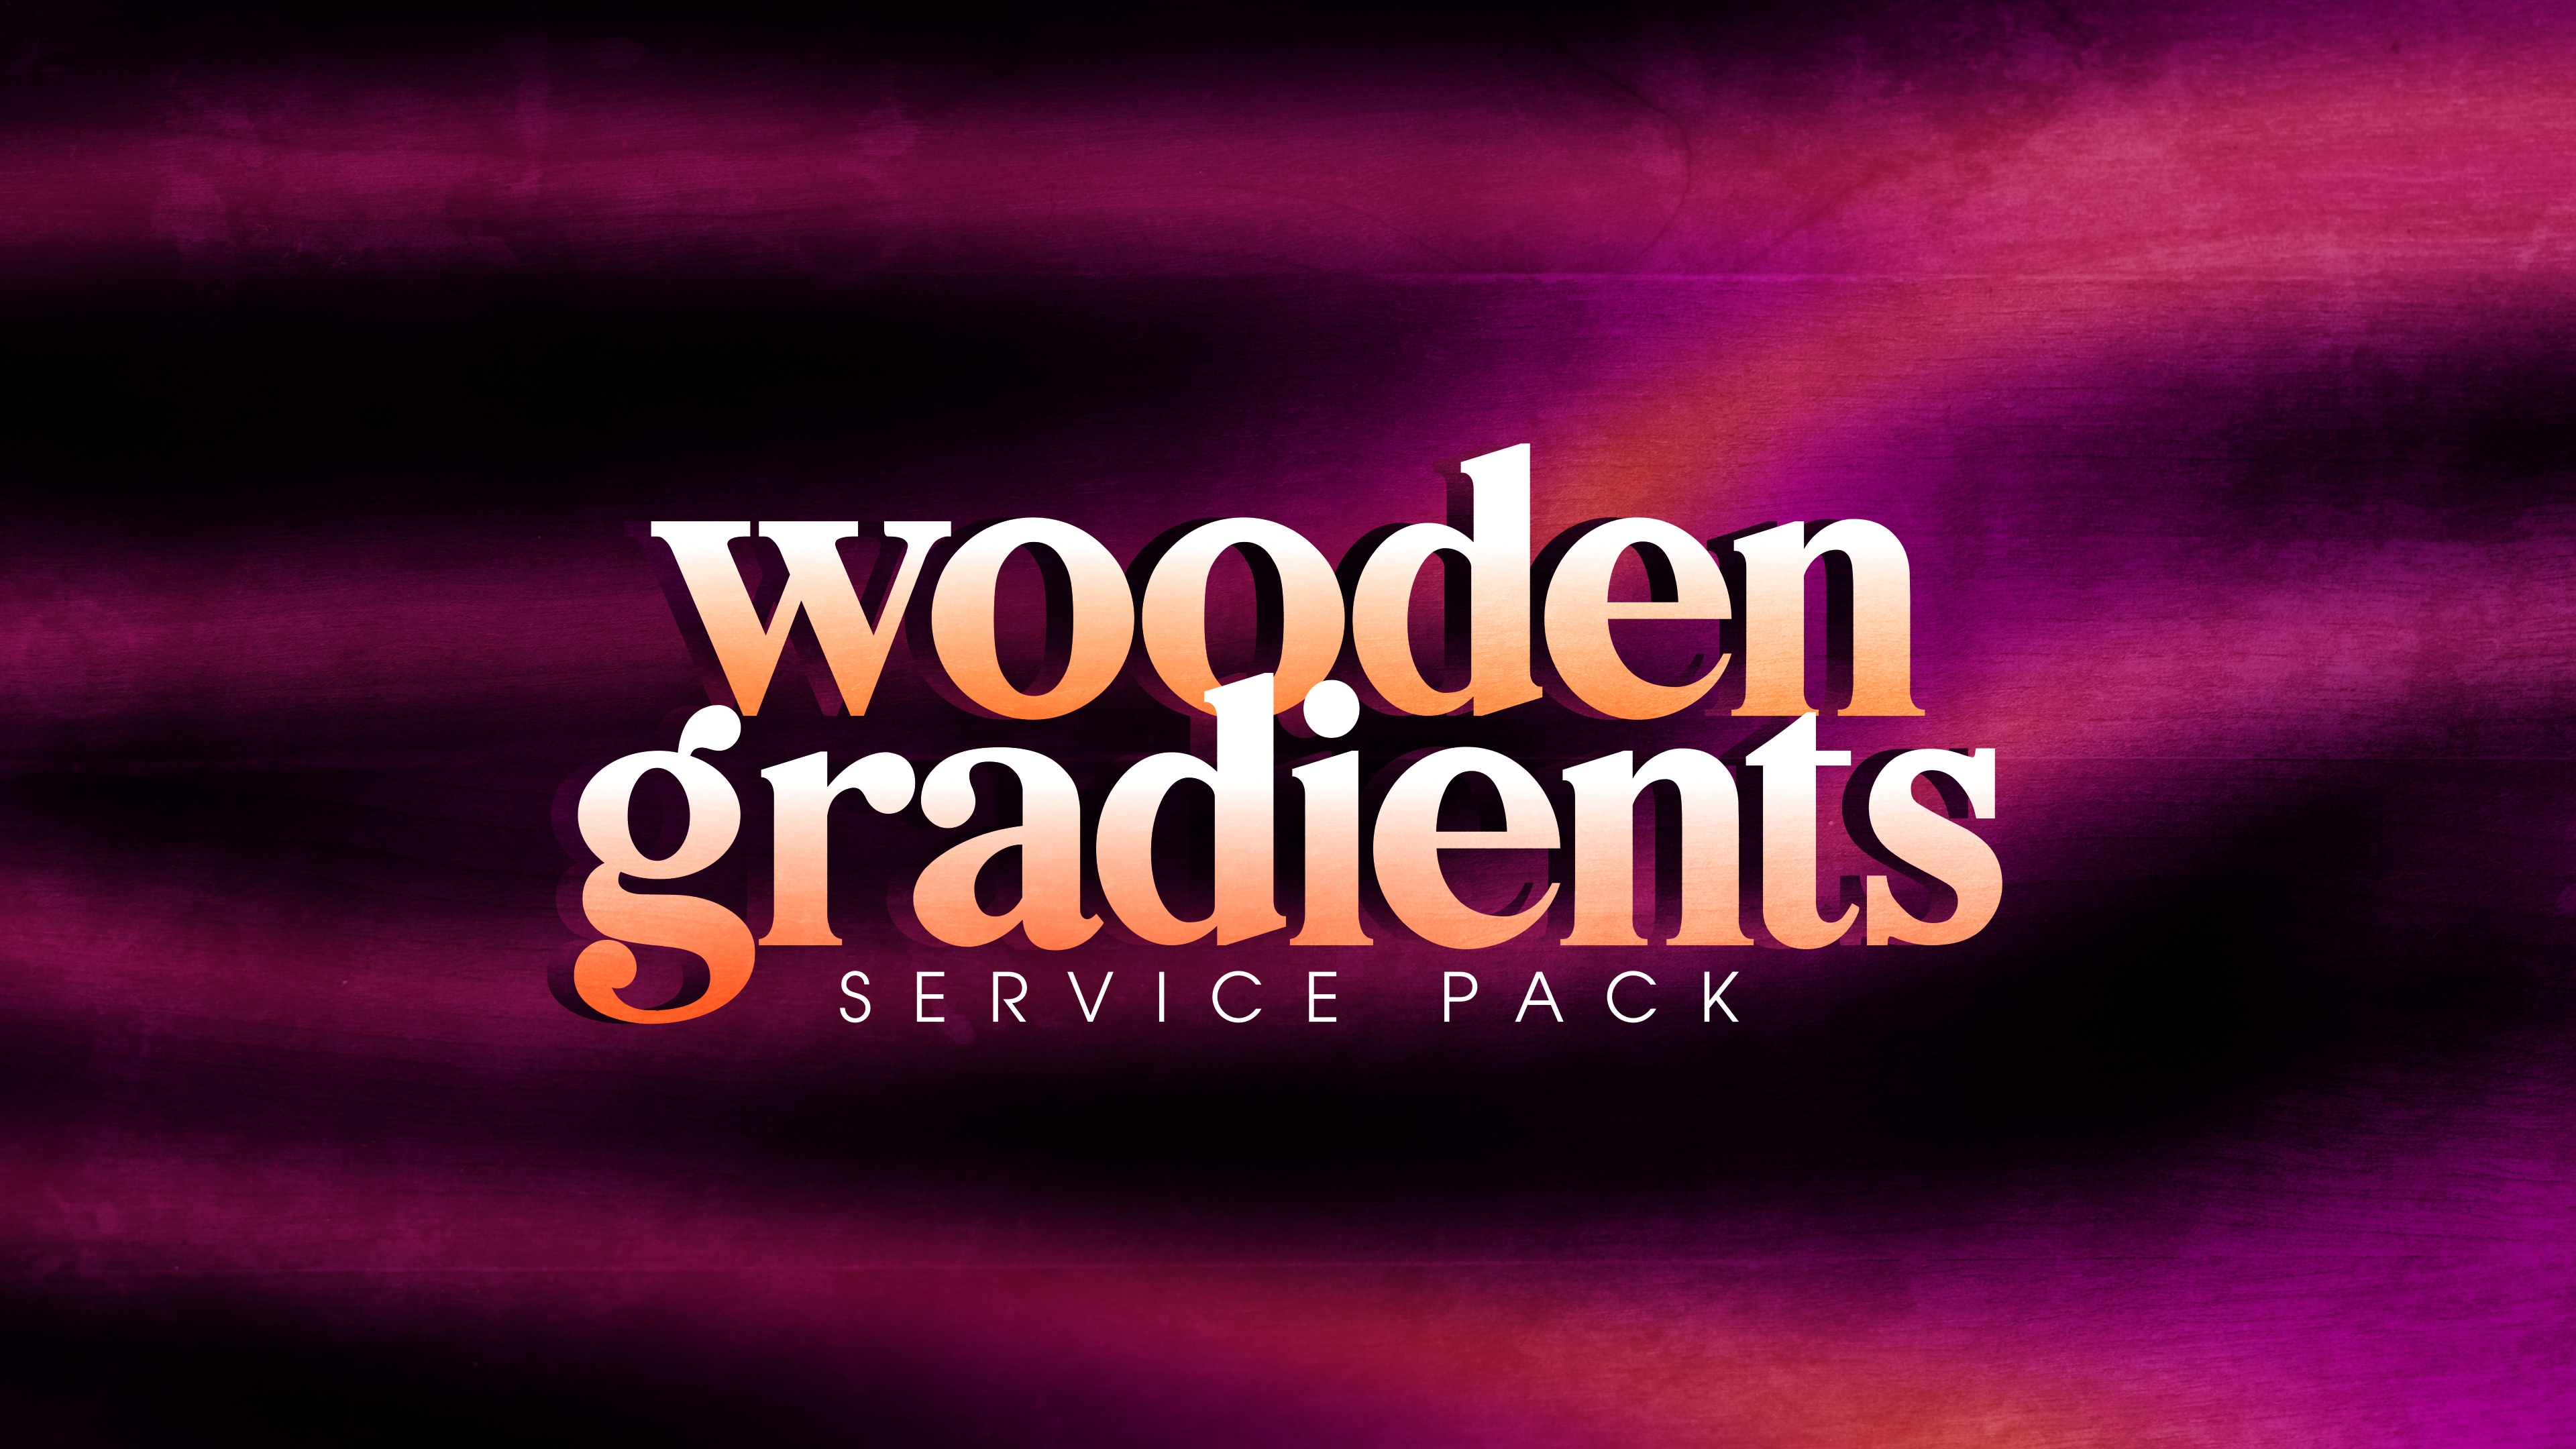 Wooden Gradients Service Pack